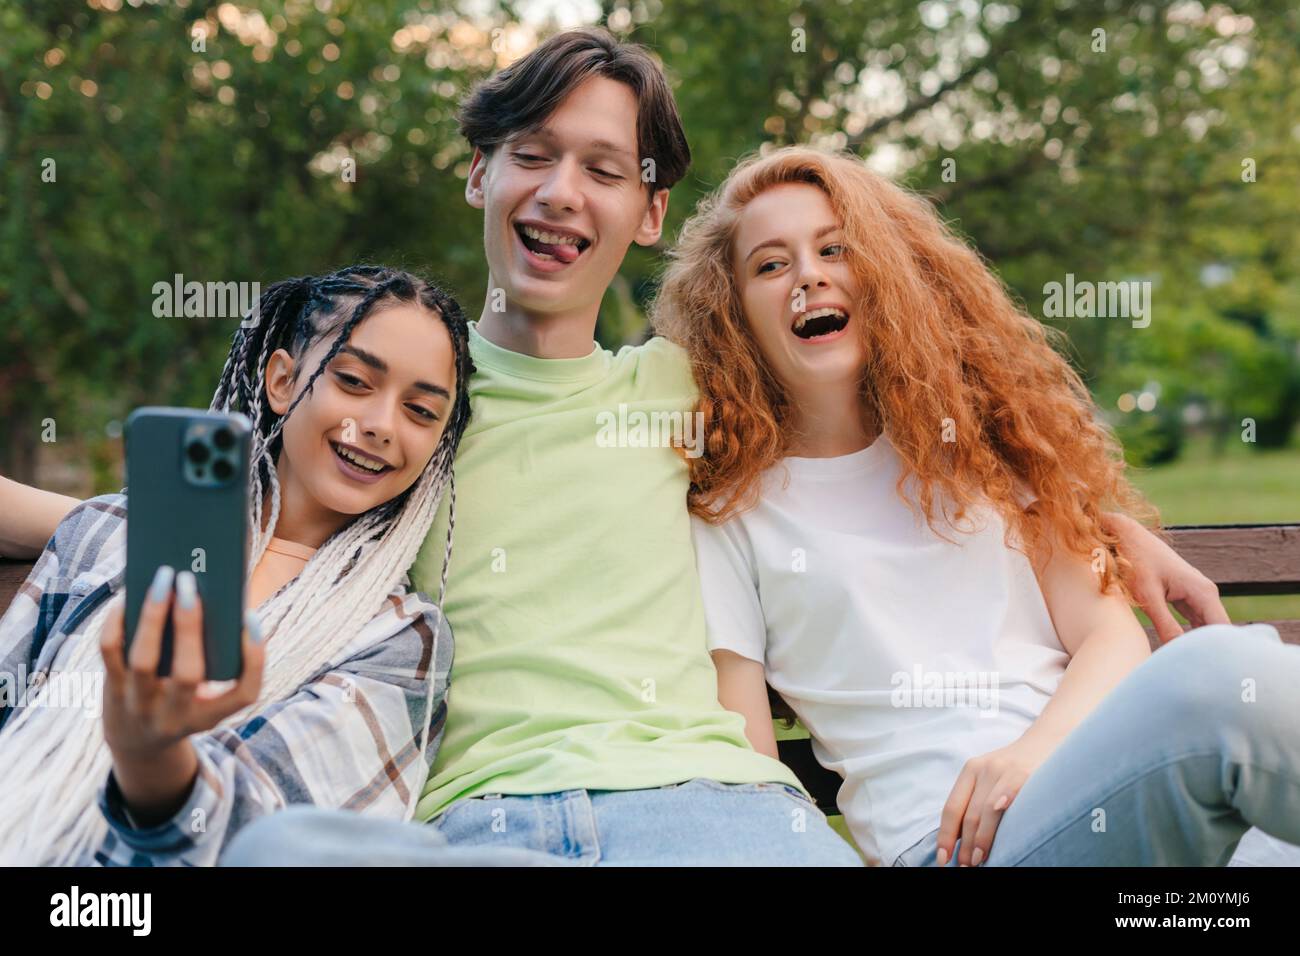 Three caucasian smiling friends at the park sitting on a bench and taking selfies using a smart phone. Summer vacation fun. Having fun. Stock Photo